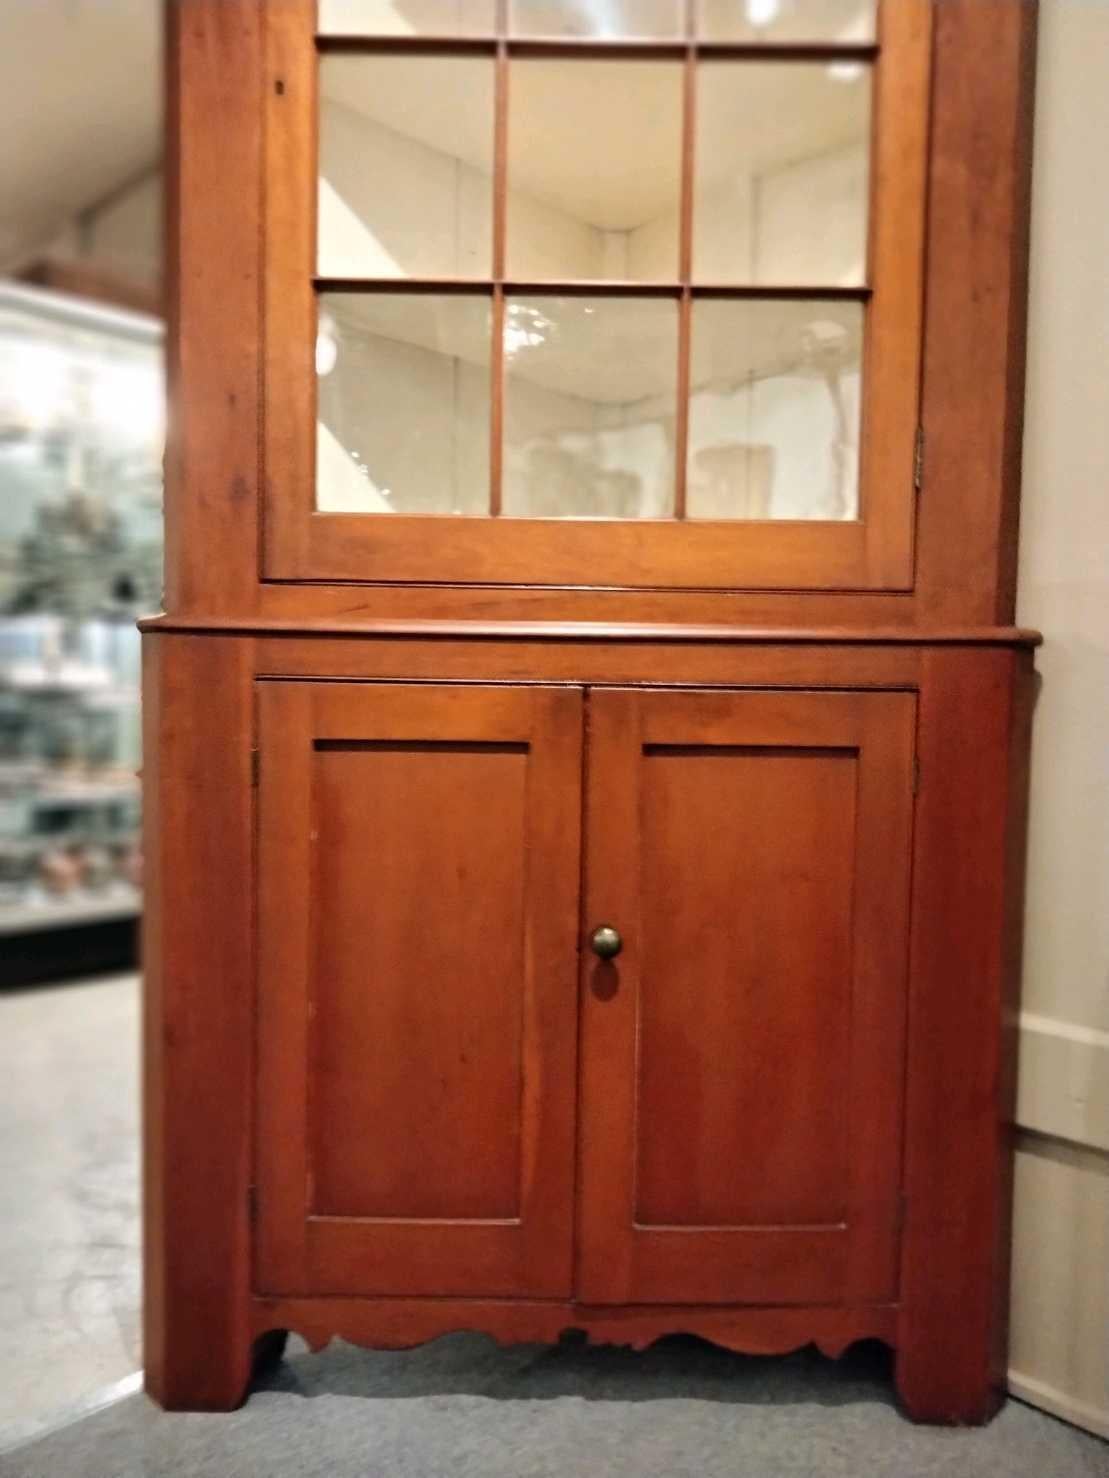 19Thc Original red painted two piece corner cabinet was found in Lancaster County,Pennsylvania and is in pristine condition.The interior is in cream colored paint is later painted interior. The cabinet is cherry wood with a red painted wash.